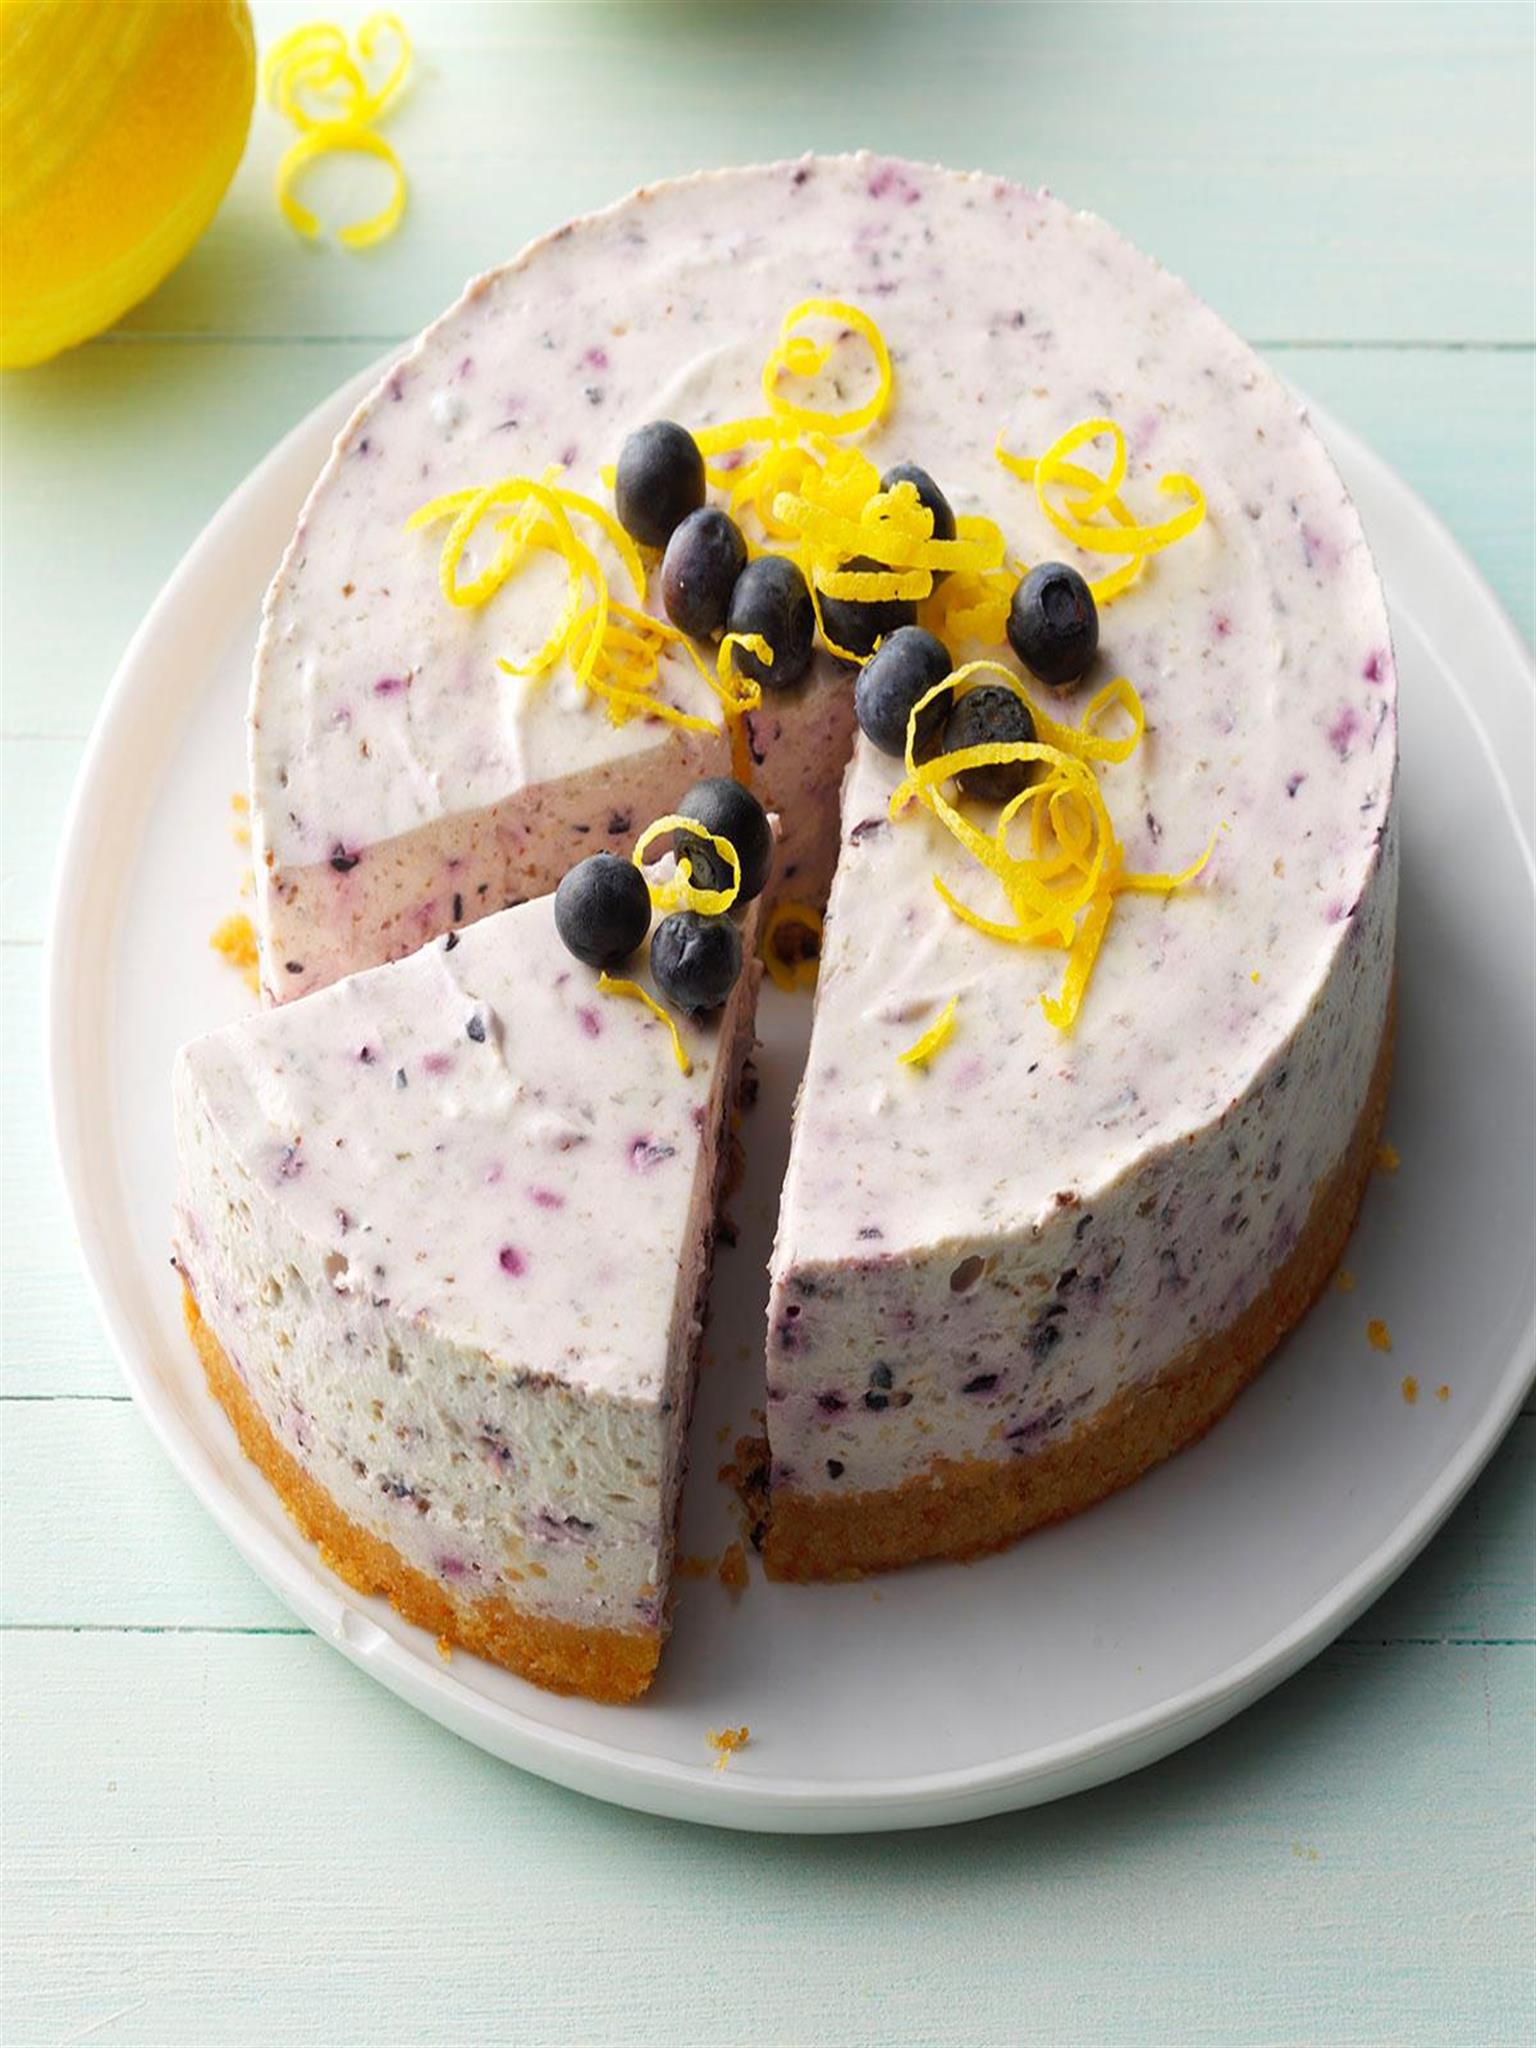 Share more than 127 blueberry cheese cream cake super hot - in.eteachers